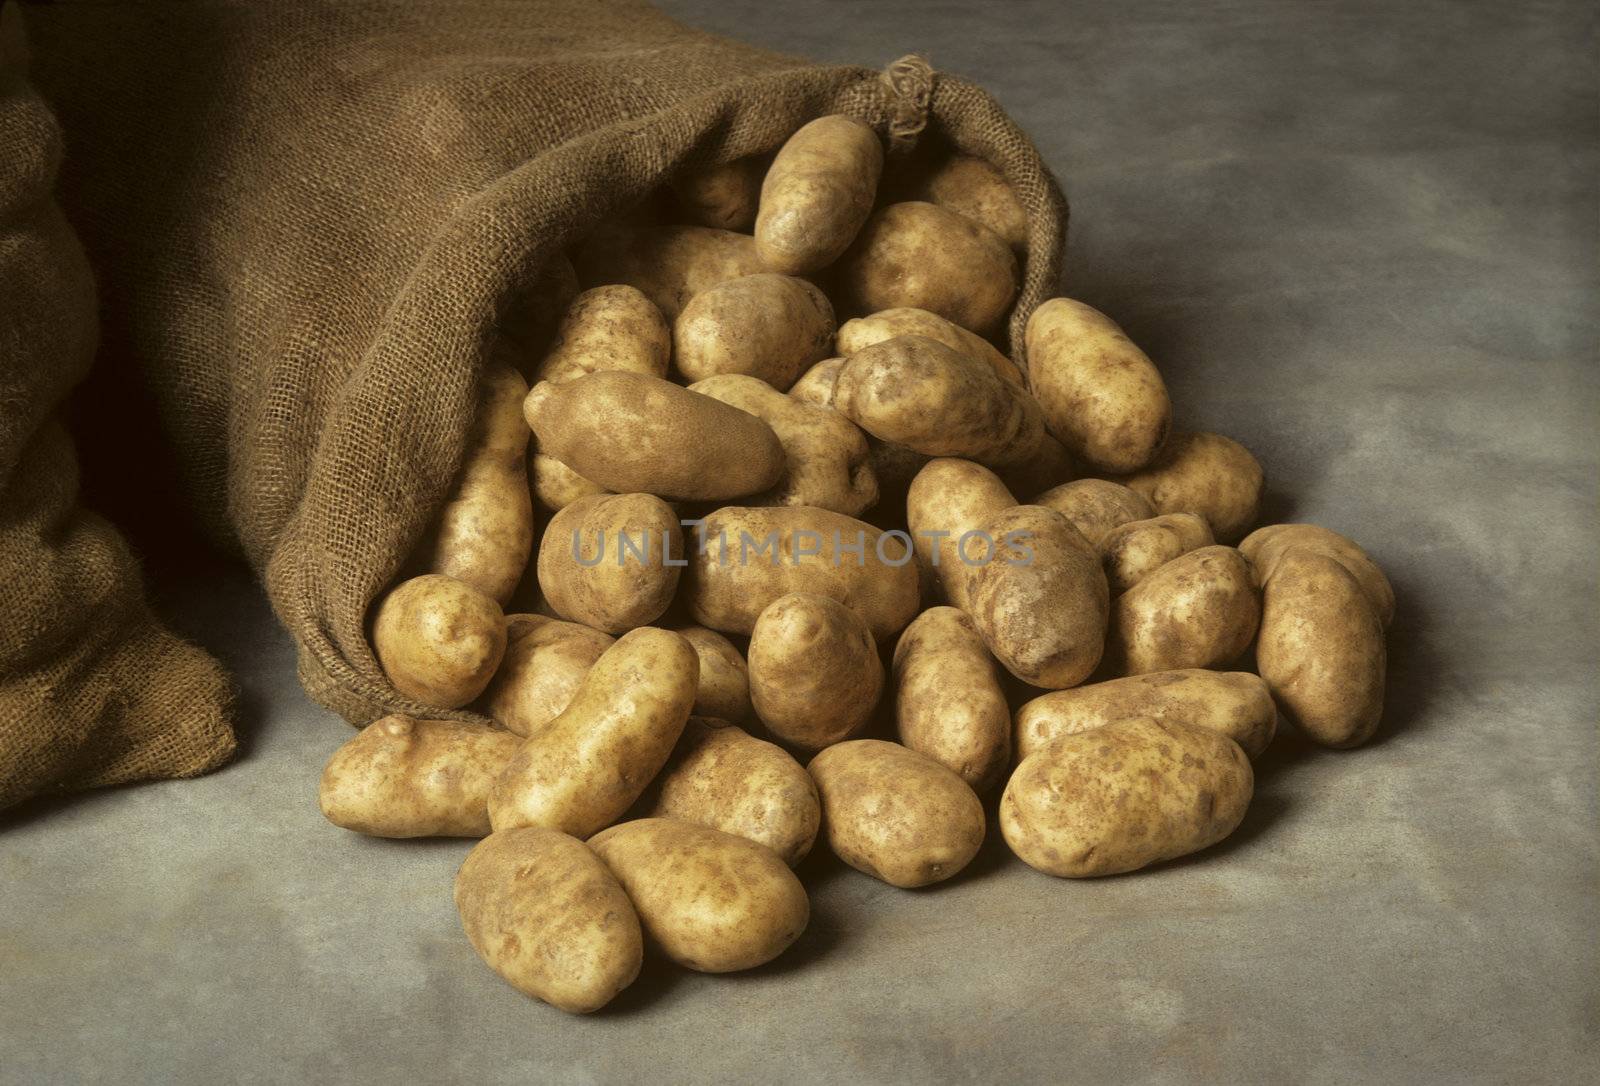 Spilled burlap sack of potatoes by Balefire9